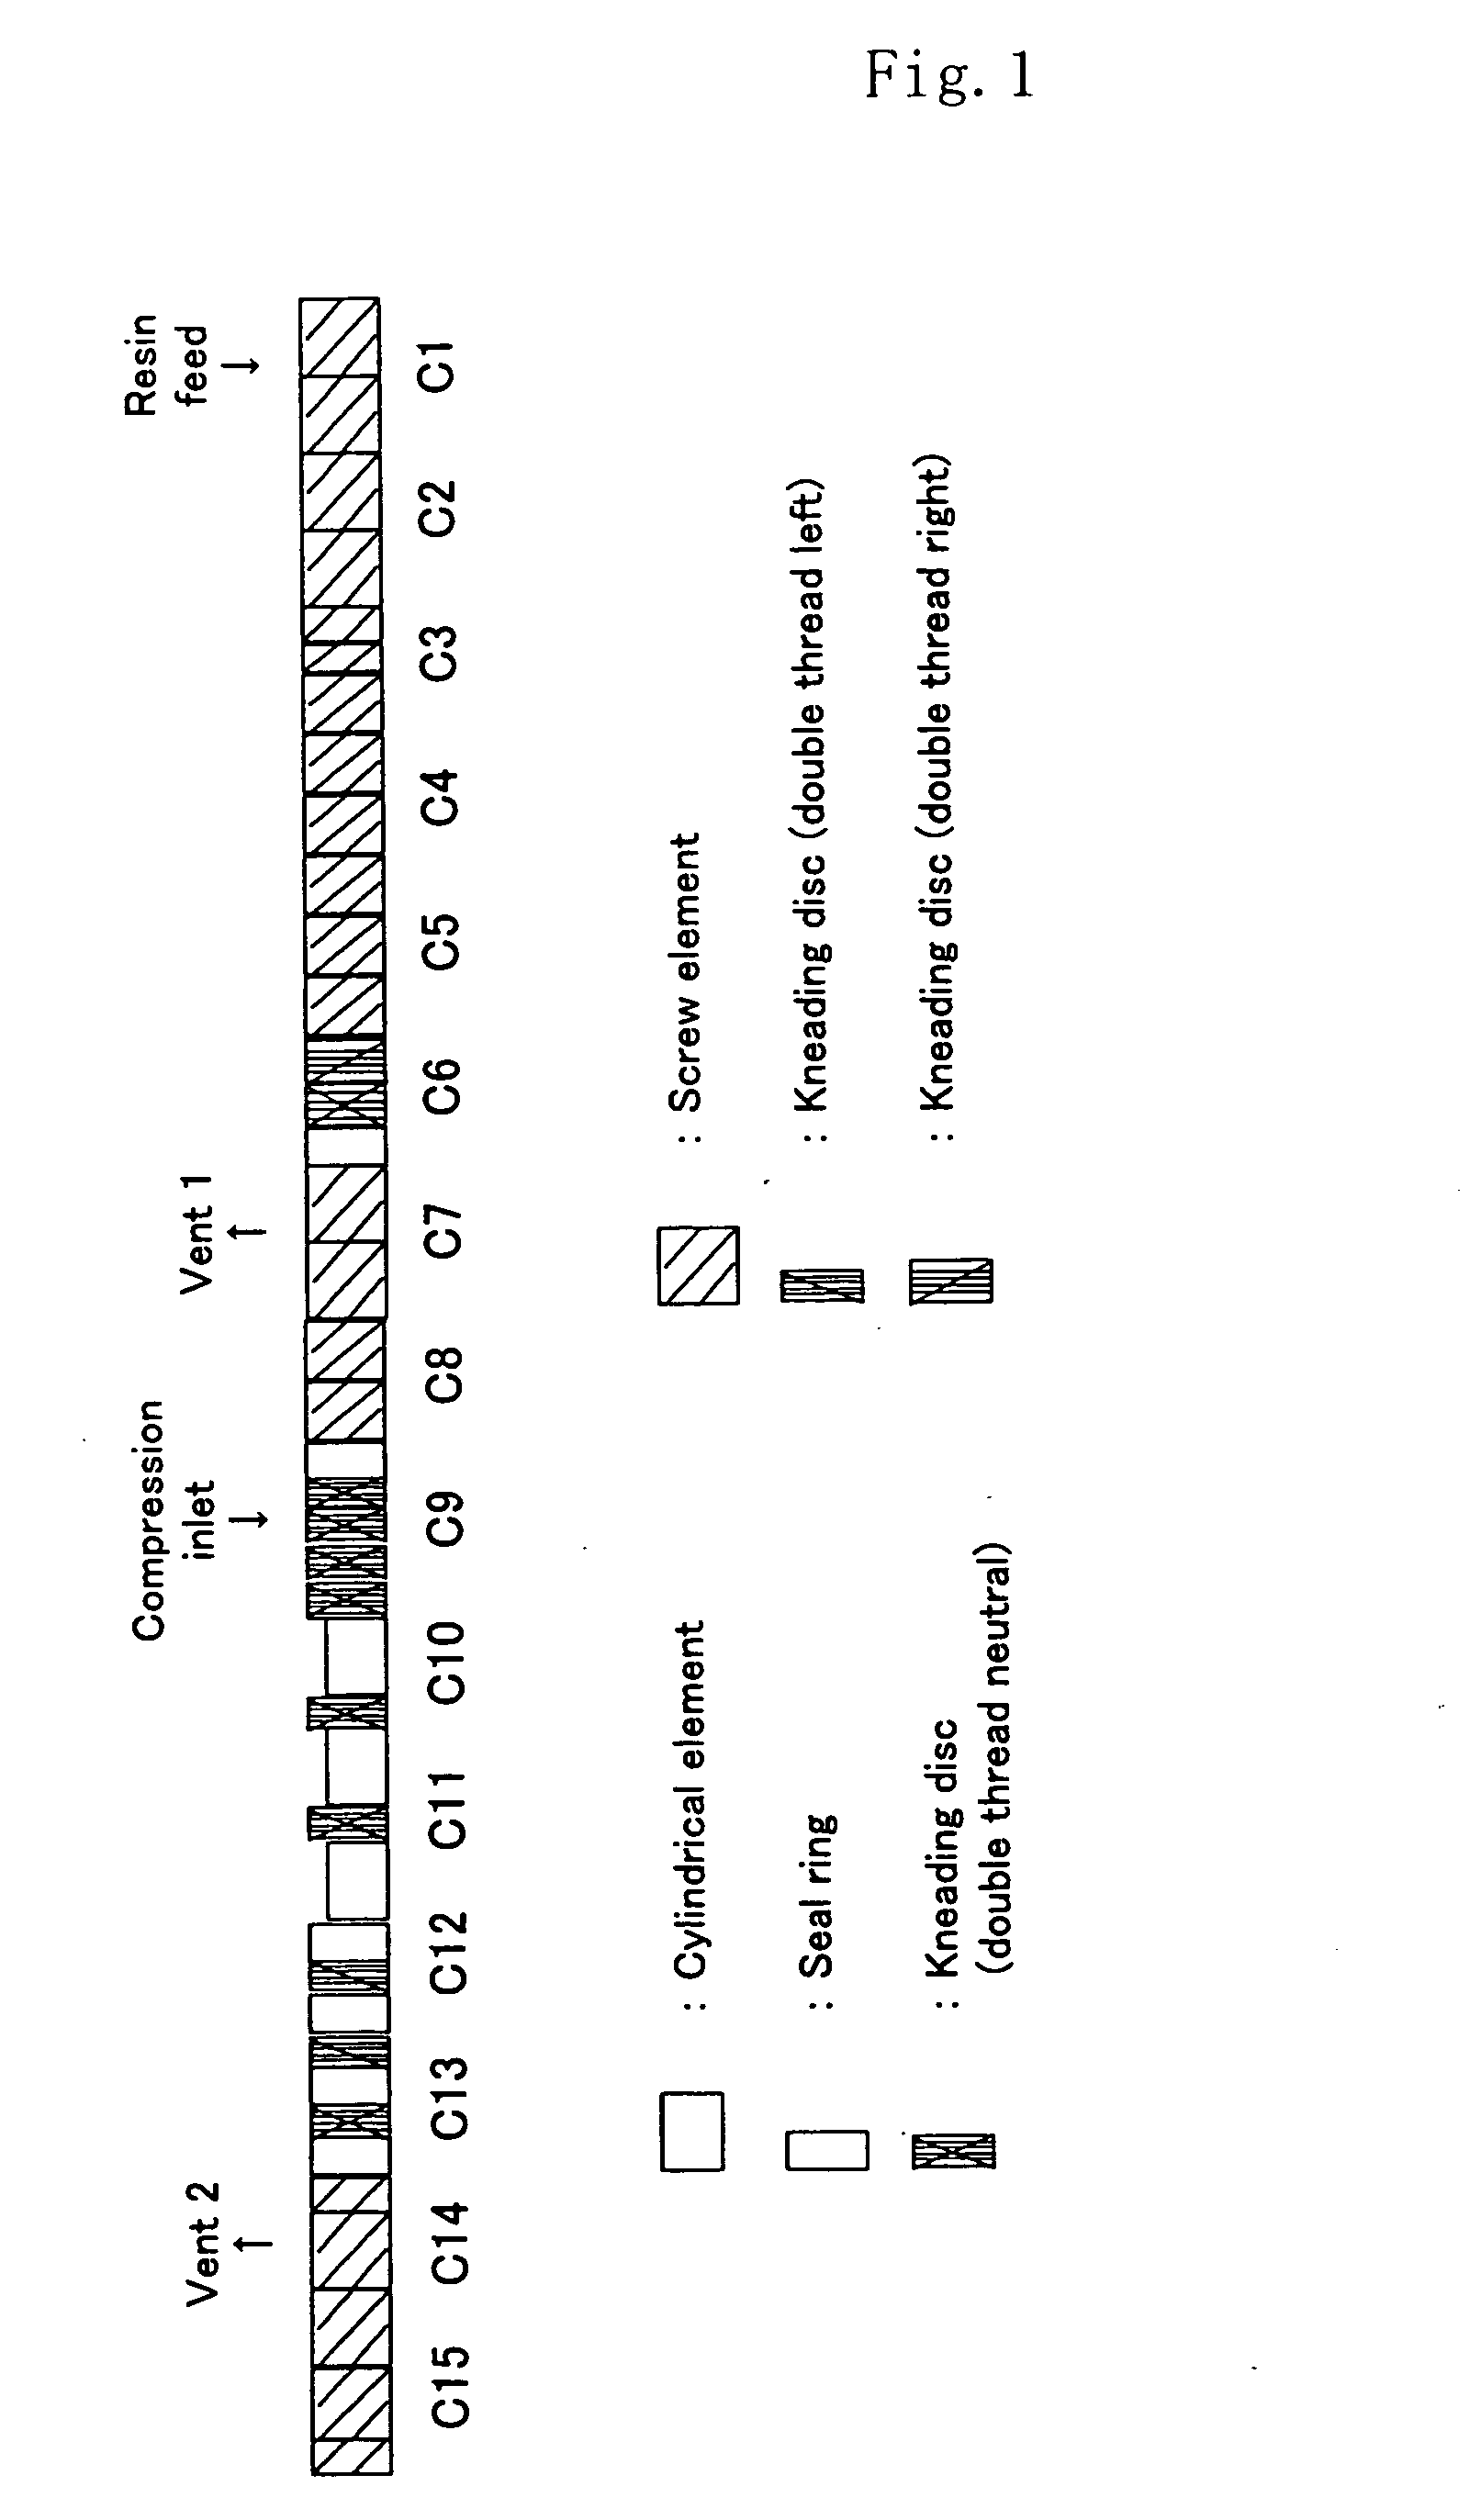 Resin composition and multi-layer structures